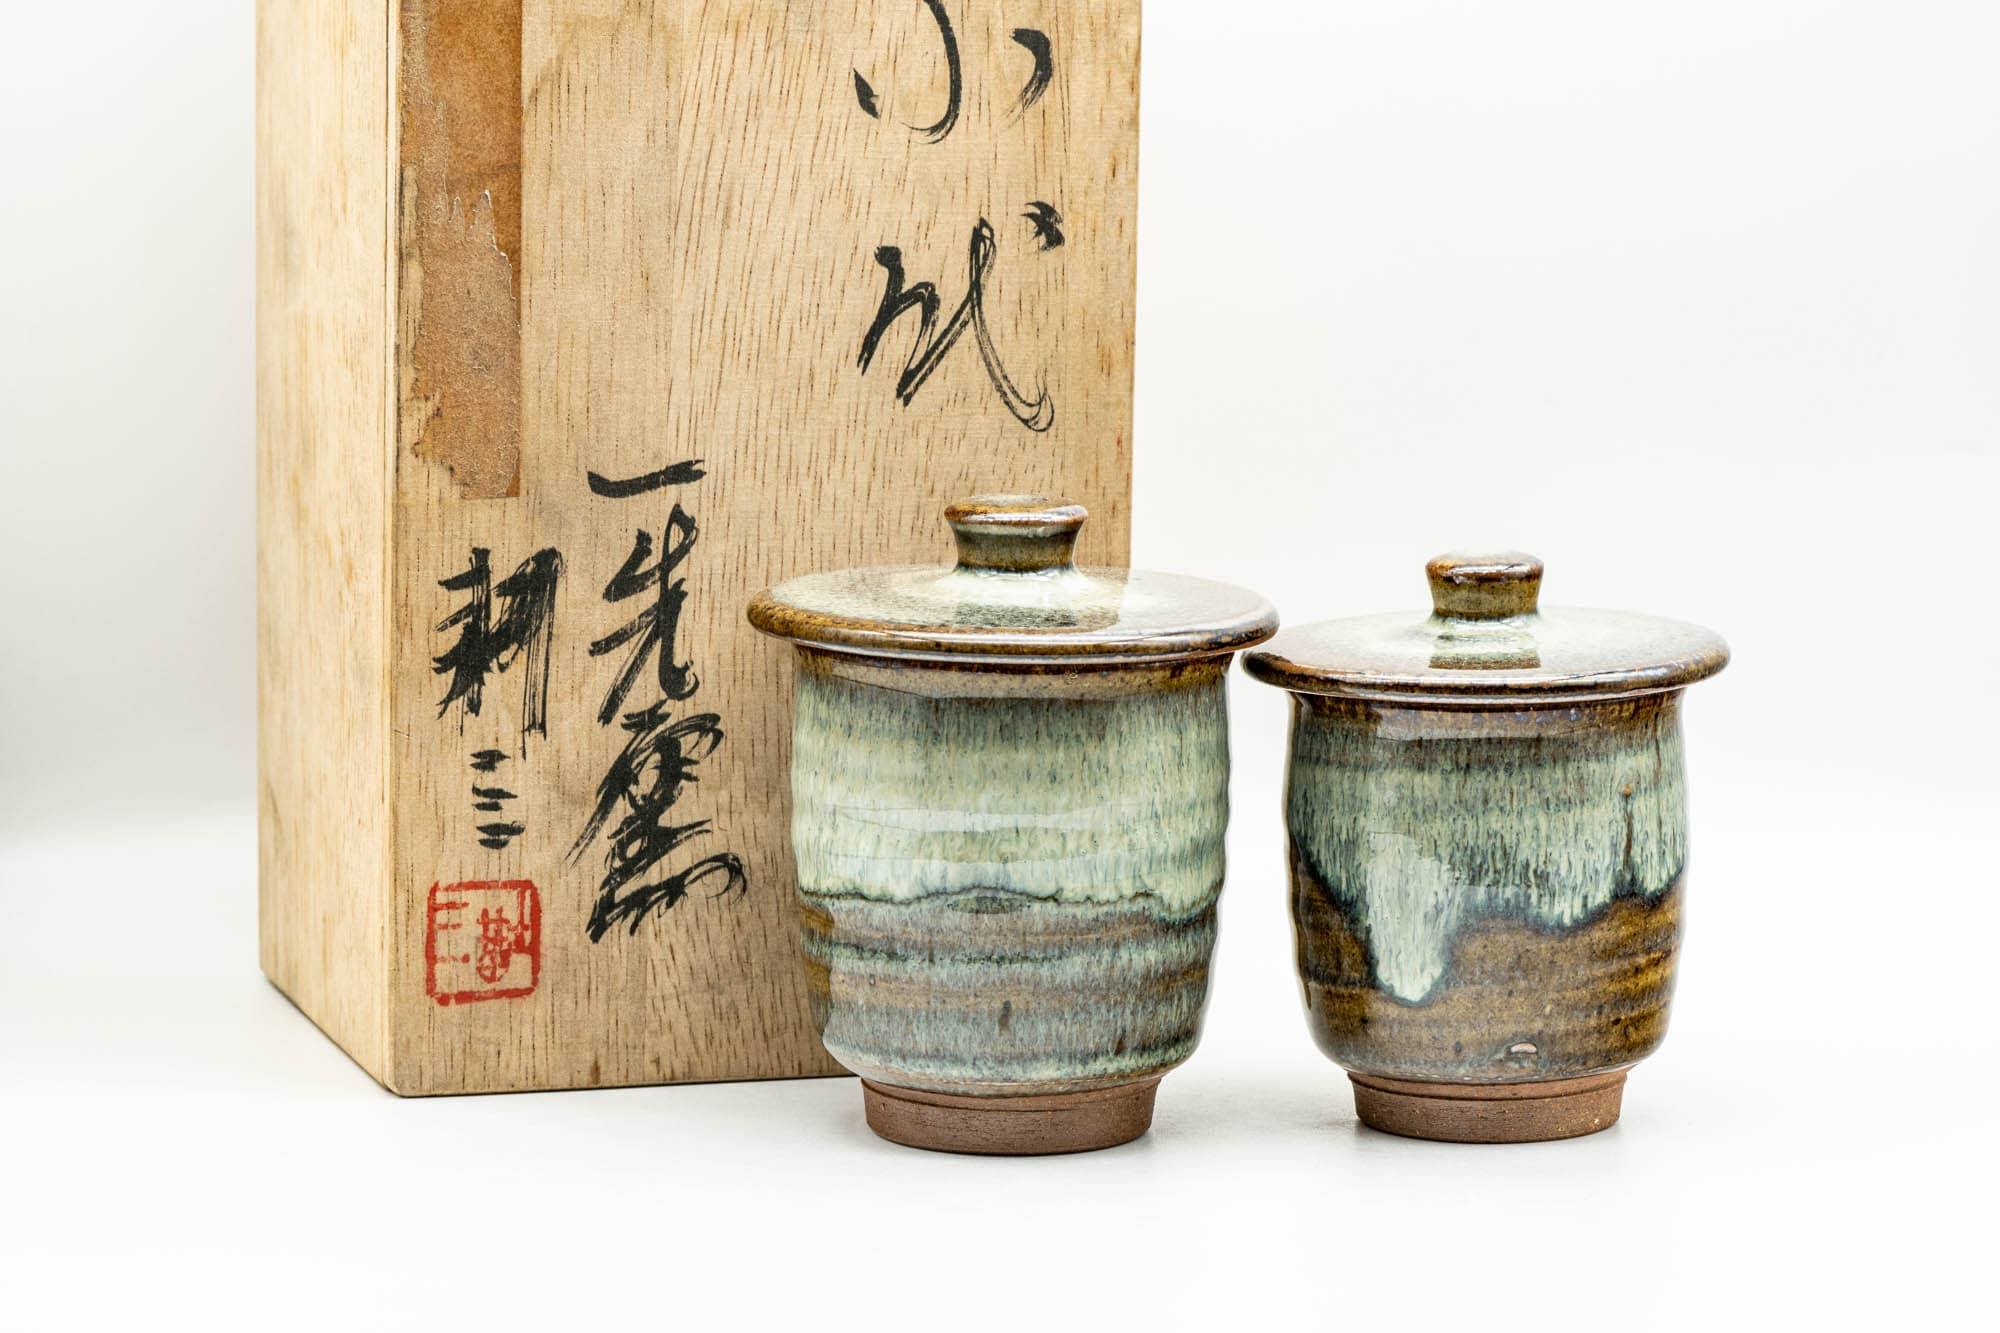 Japanese Teacups - Pair of Beige Hare's Fur Drip-Glazed Lidded Meoto Yunomi with Wooden Box